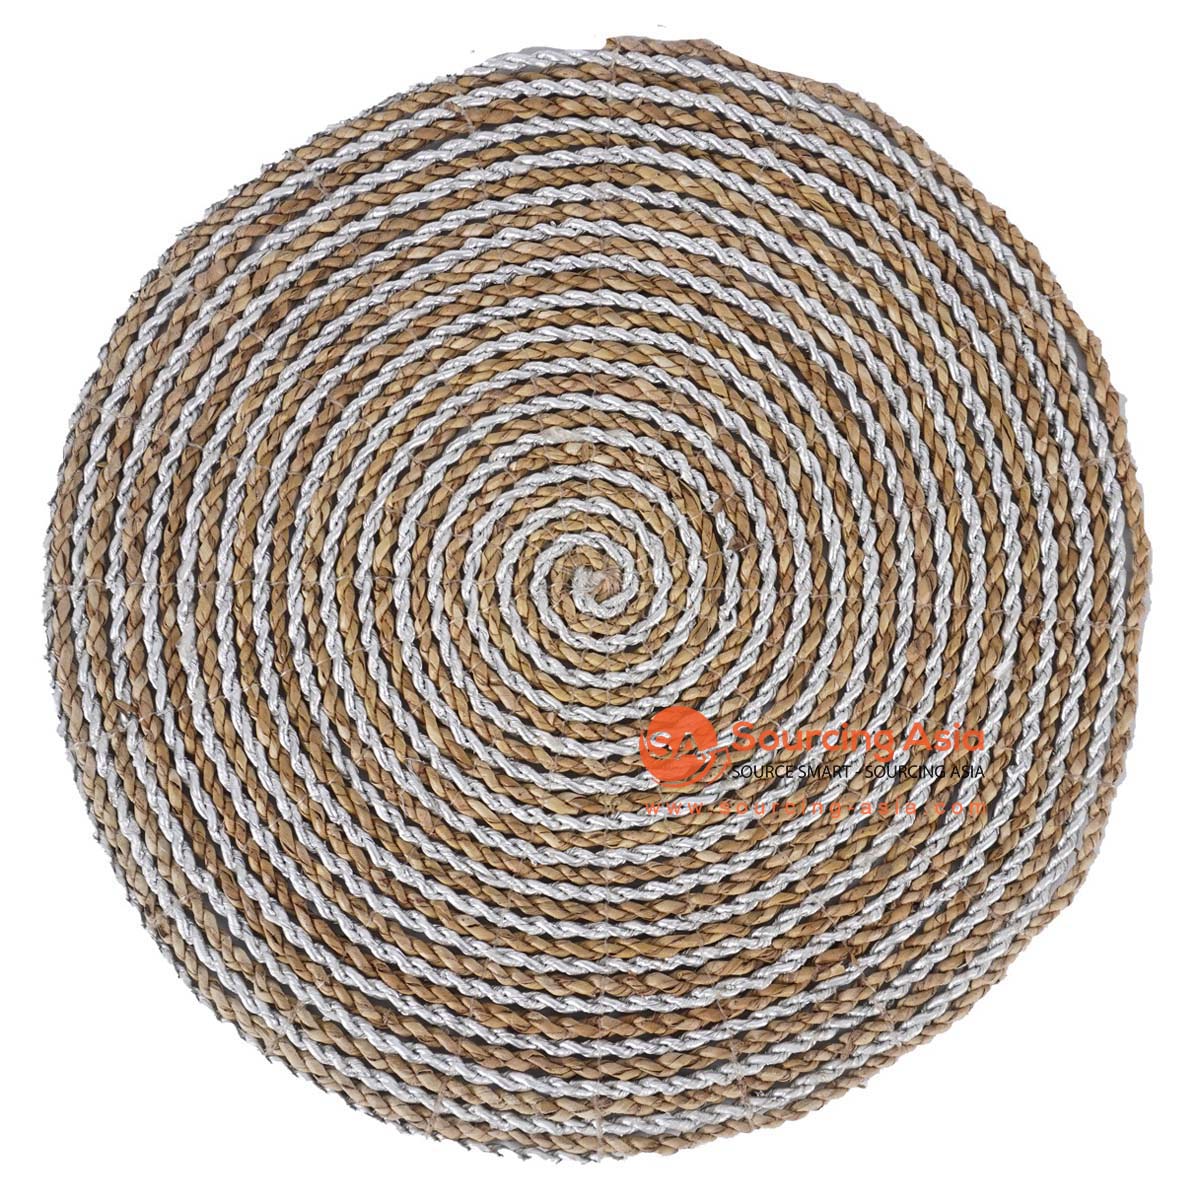 HBSC571 NATURAL AND WHITE PANDANUS ROUND PLACEMAT